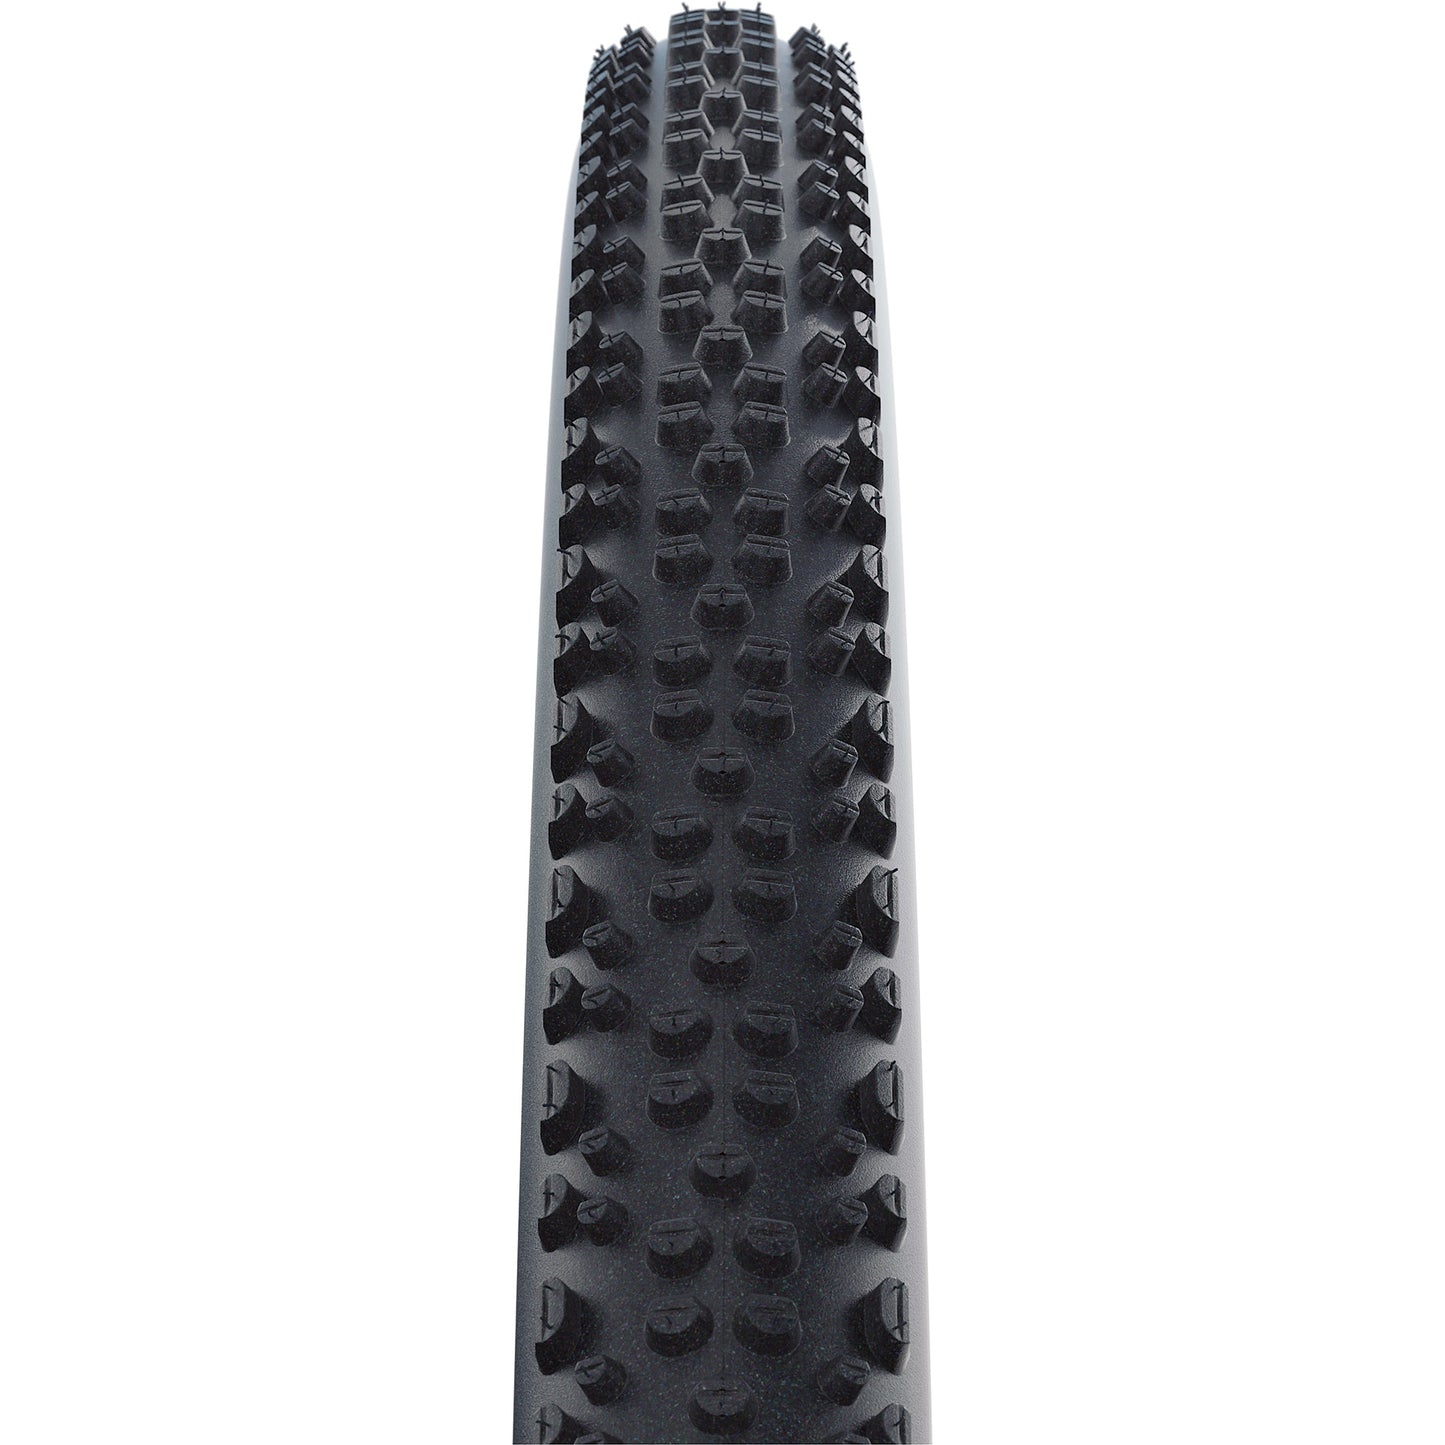 Schwalbe Buitenband 28-1.30 (33-622) X-One Allround Perf TLE zw-sk.